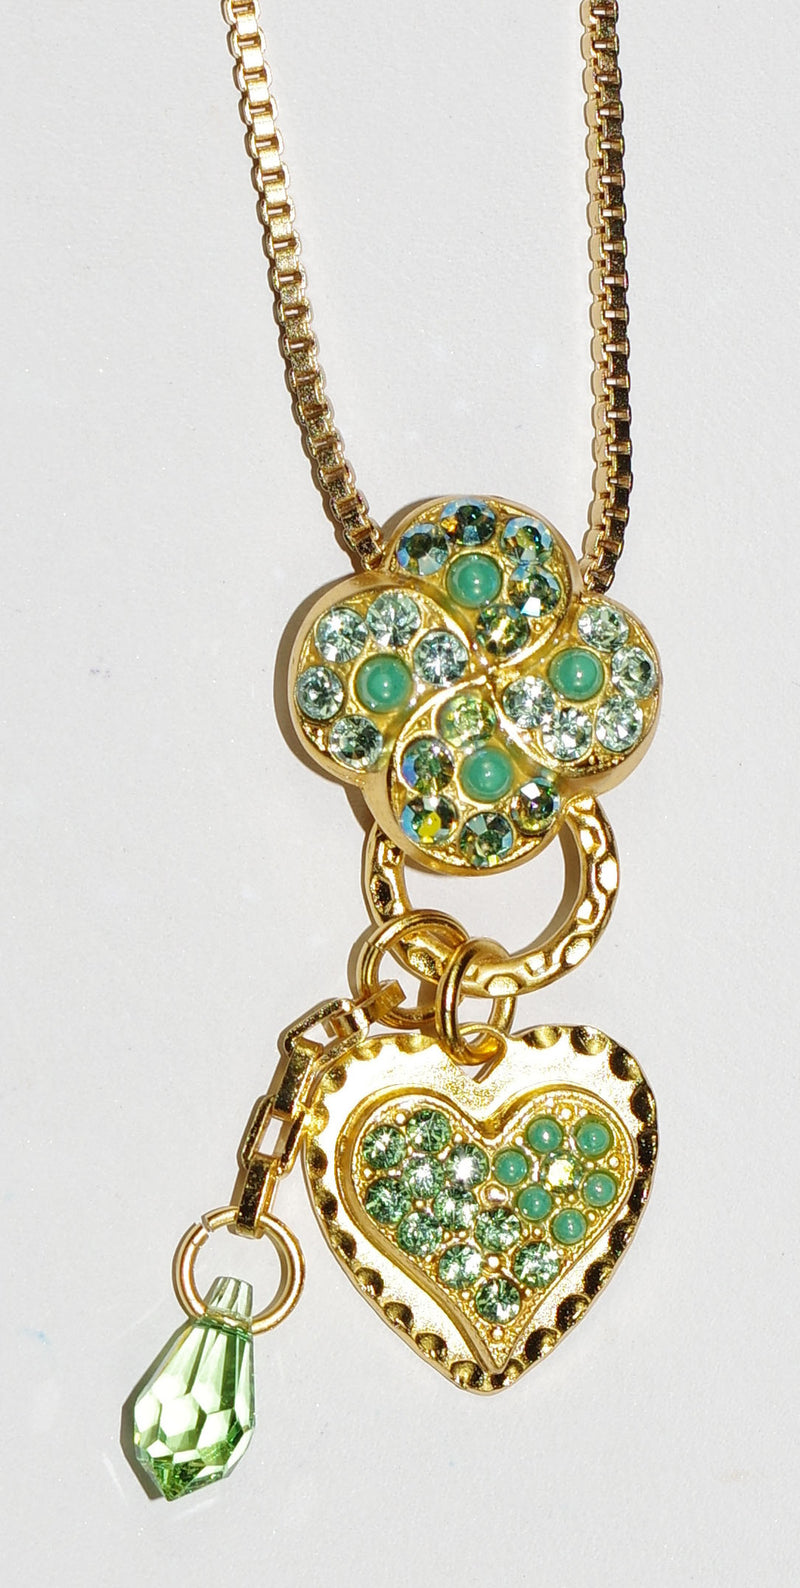 MARIANA PENDANT OASIS: green, a/b stones in yellow gold setting, 2" charm, 14" adjustable chain